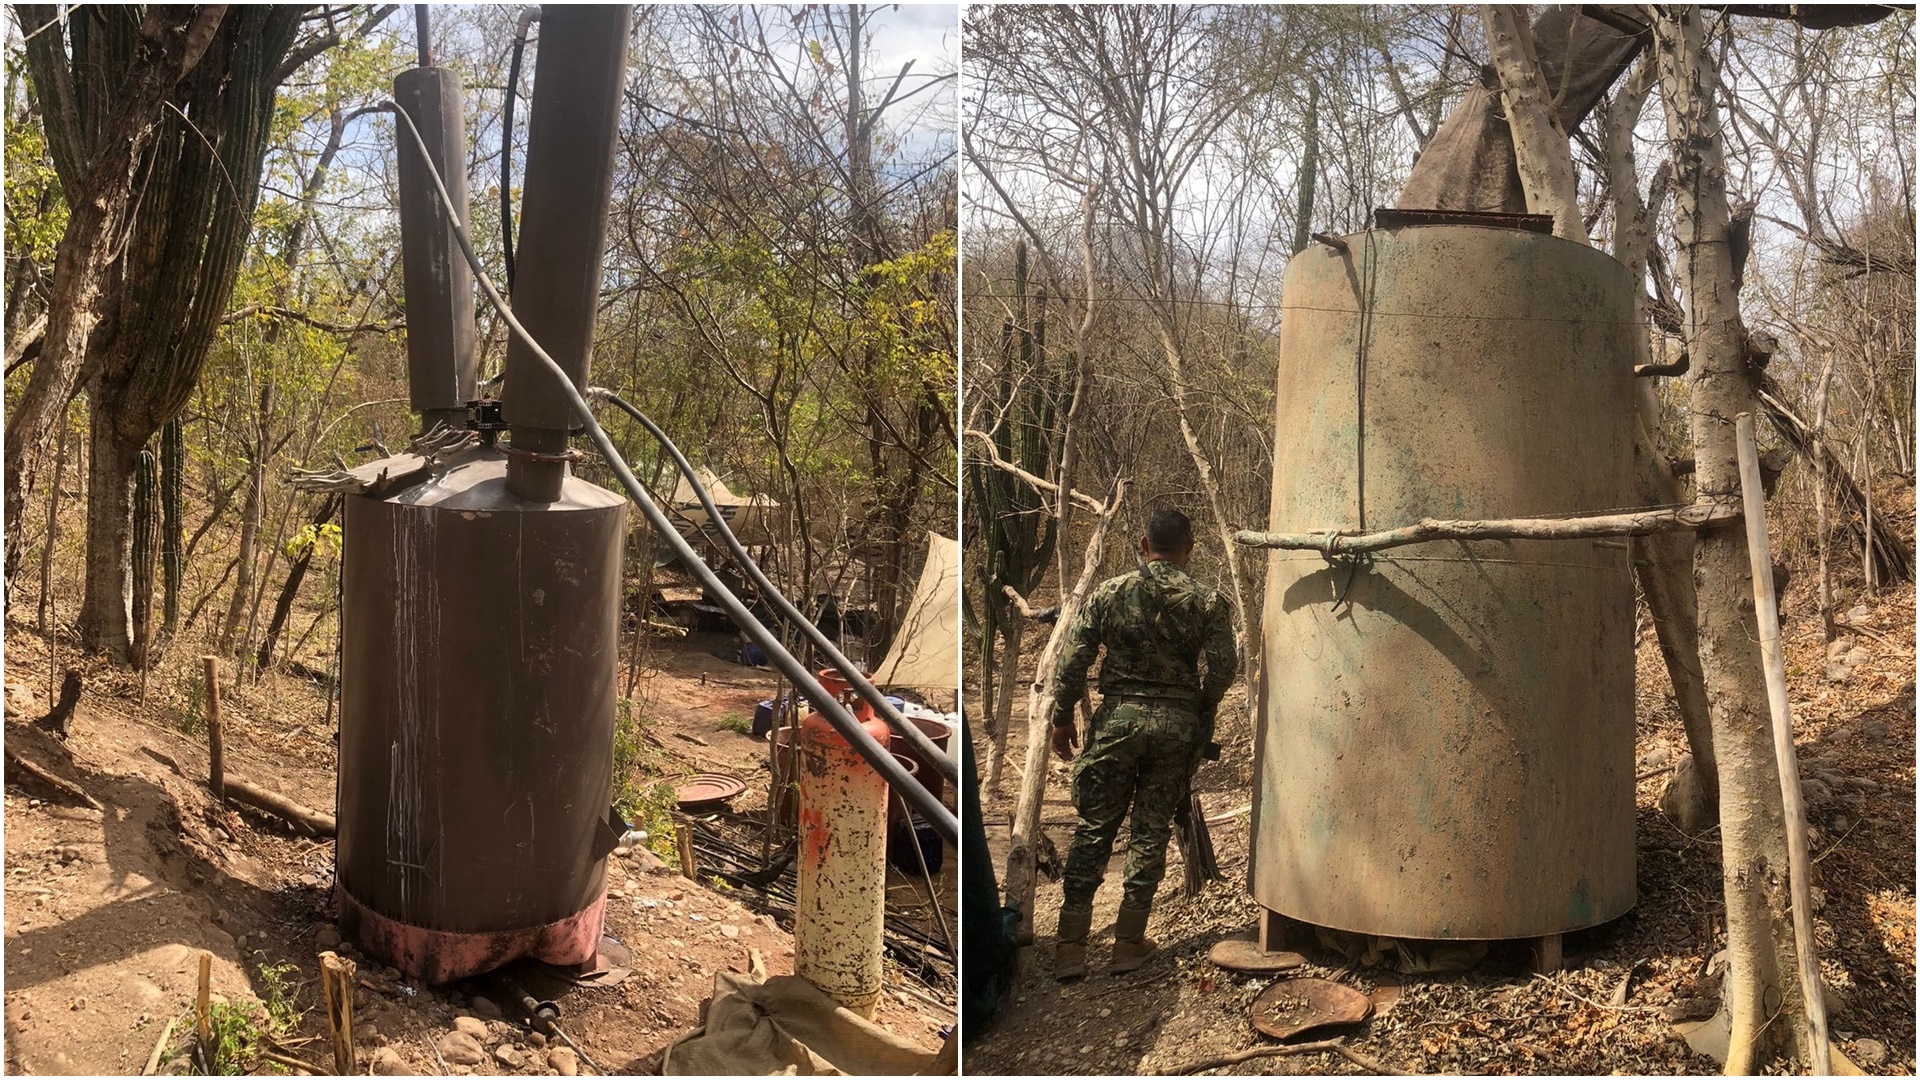 Armada de Mexico reported that these secret centers were discovered during patrols in two areas of Sinaloa state.Photo: Semar